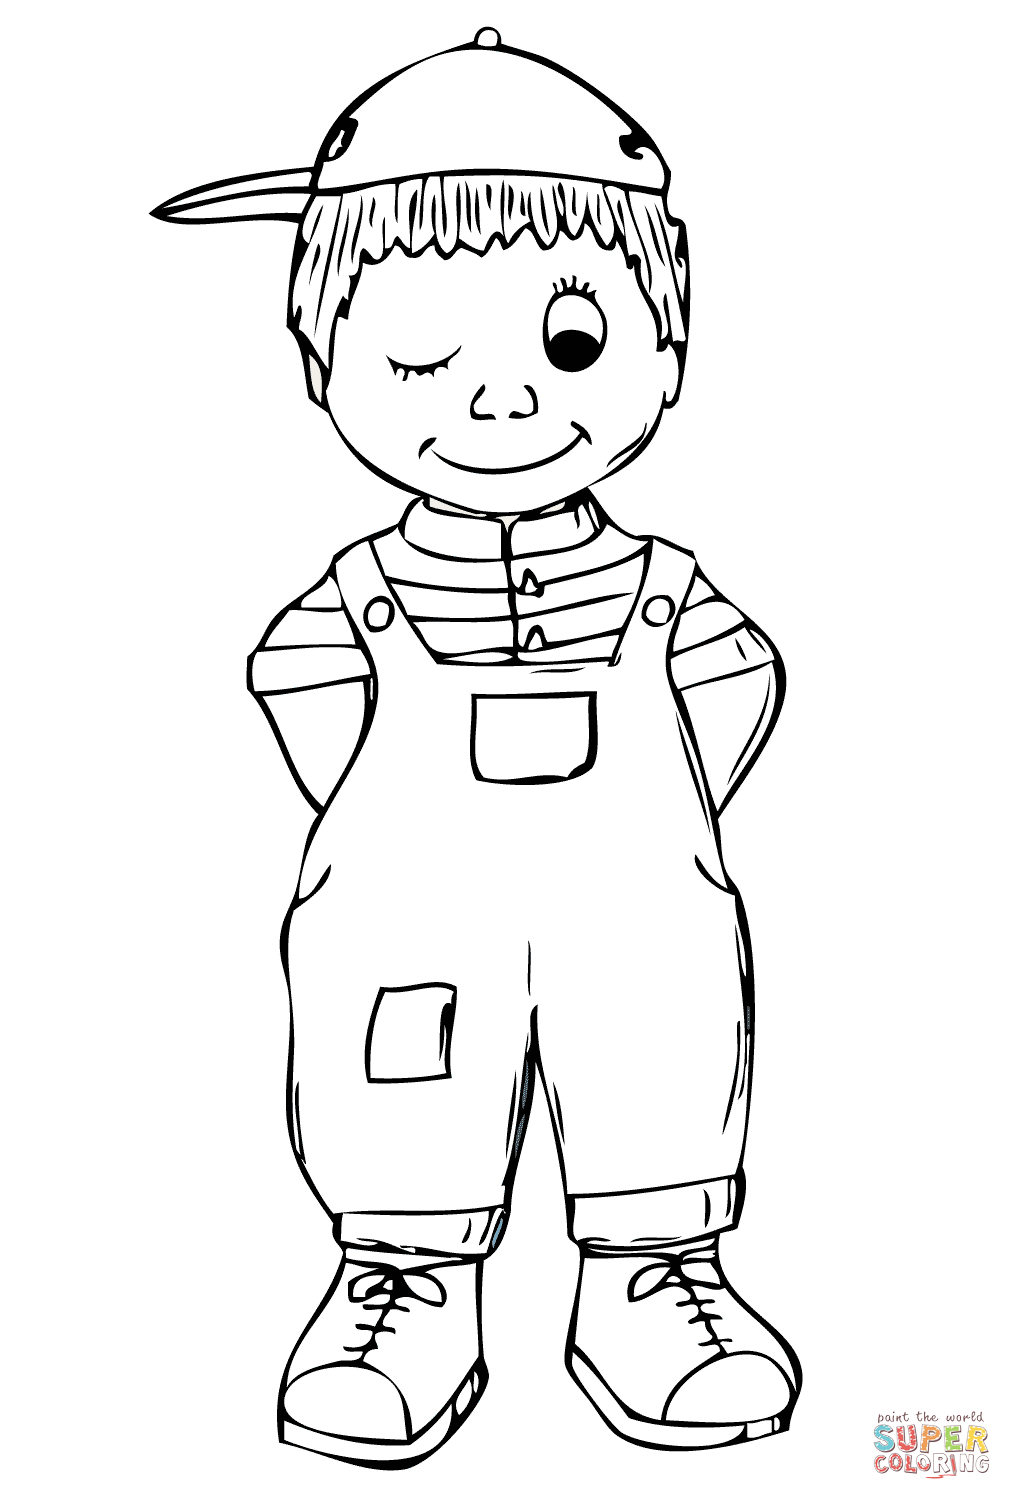 its-a-boy-coloring-pages-at-getcolorings-free-printable-colorings